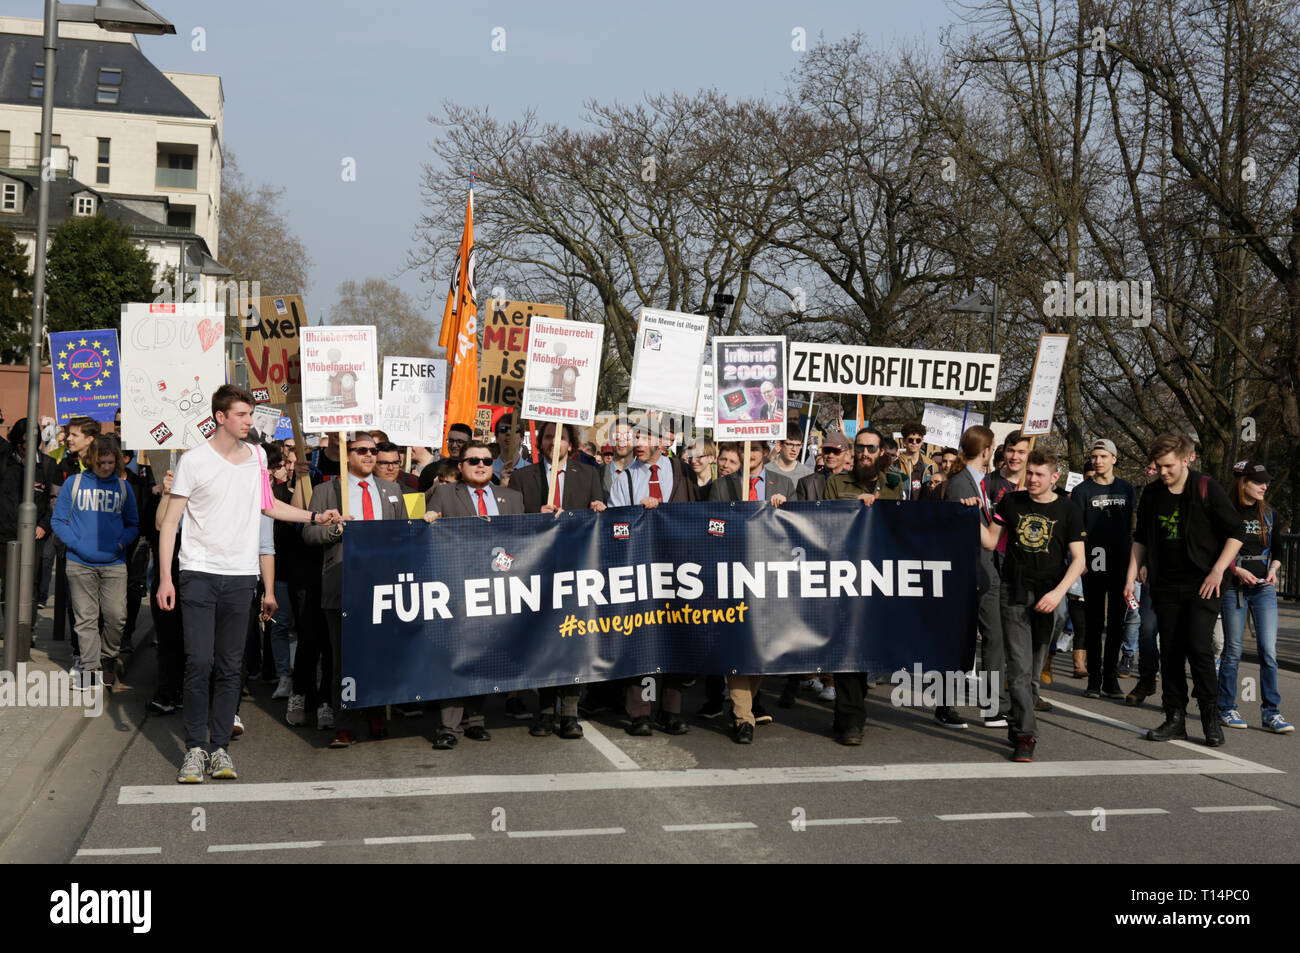 Frankfurt, Germany. 23rd Mar, 2019. Protesters march with a banner that reads 'For a free Internet'. More than 15,000 protesters marched through Frankfurt calling for the Internet to remain free and to not to pass the new EU Copyright Directive into law. The protest was part of a Germany wide day of protest against the EU directive. Credit: Michael Debets/Pacific Press/Alamy Live News Stock Photo